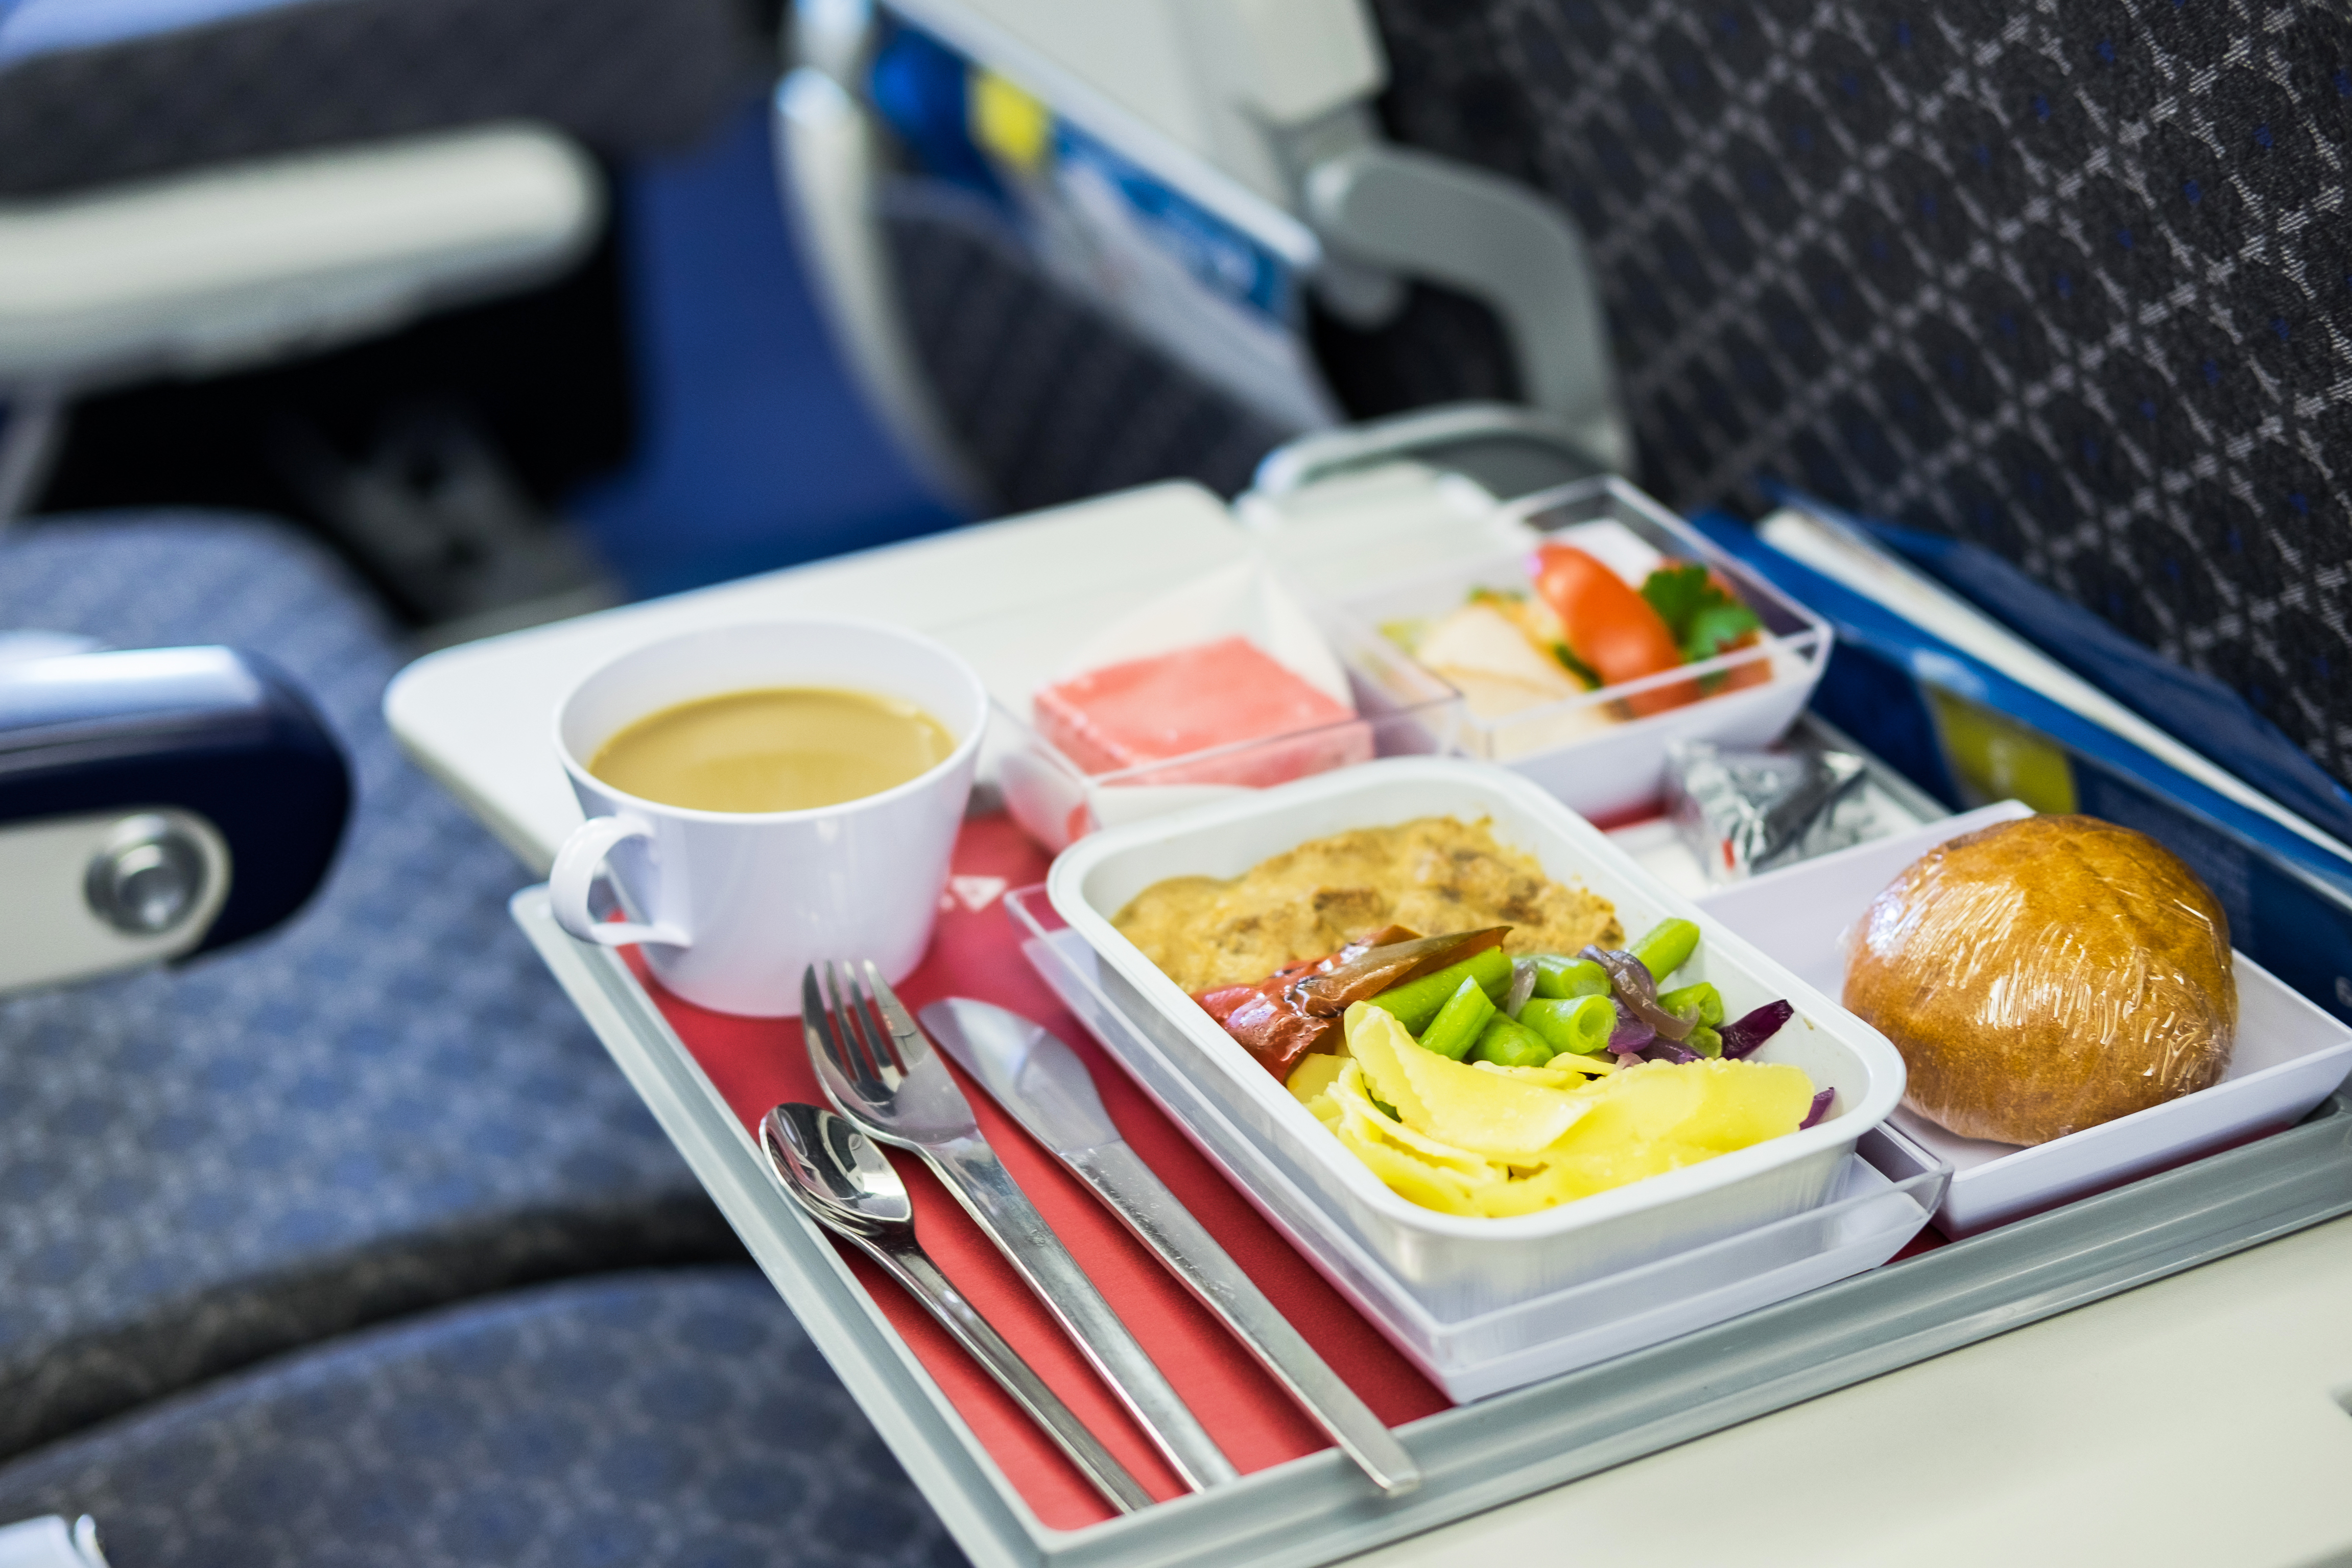 Food served in an airplane | Source: Shutterstock